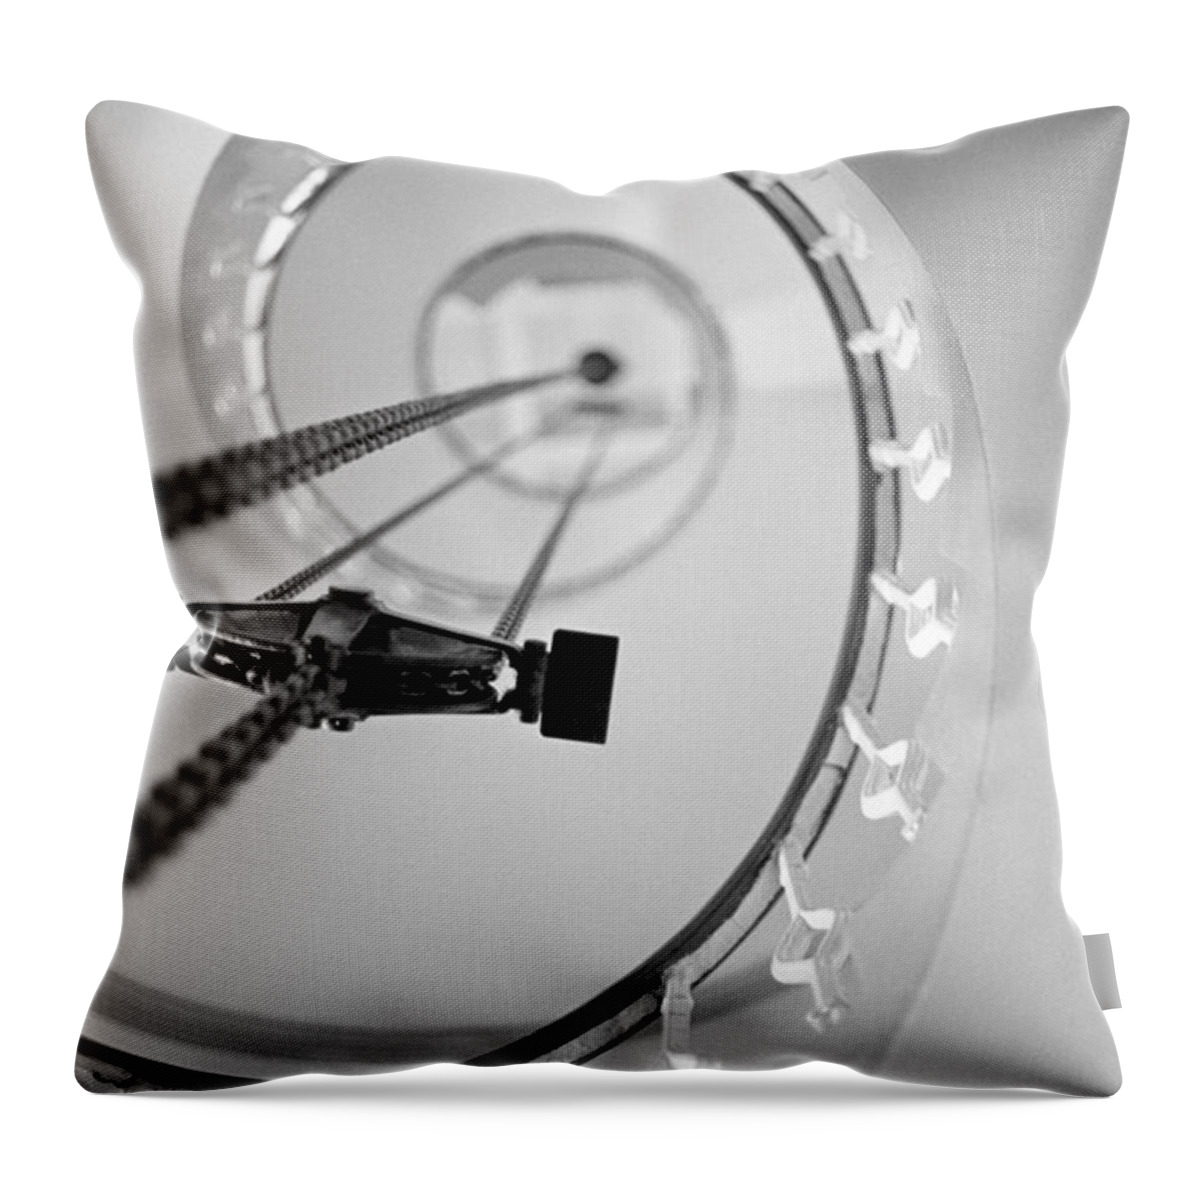 Spiral Throw Pillow featuring the photograph Spiral Staircase by Riccardo Mottola